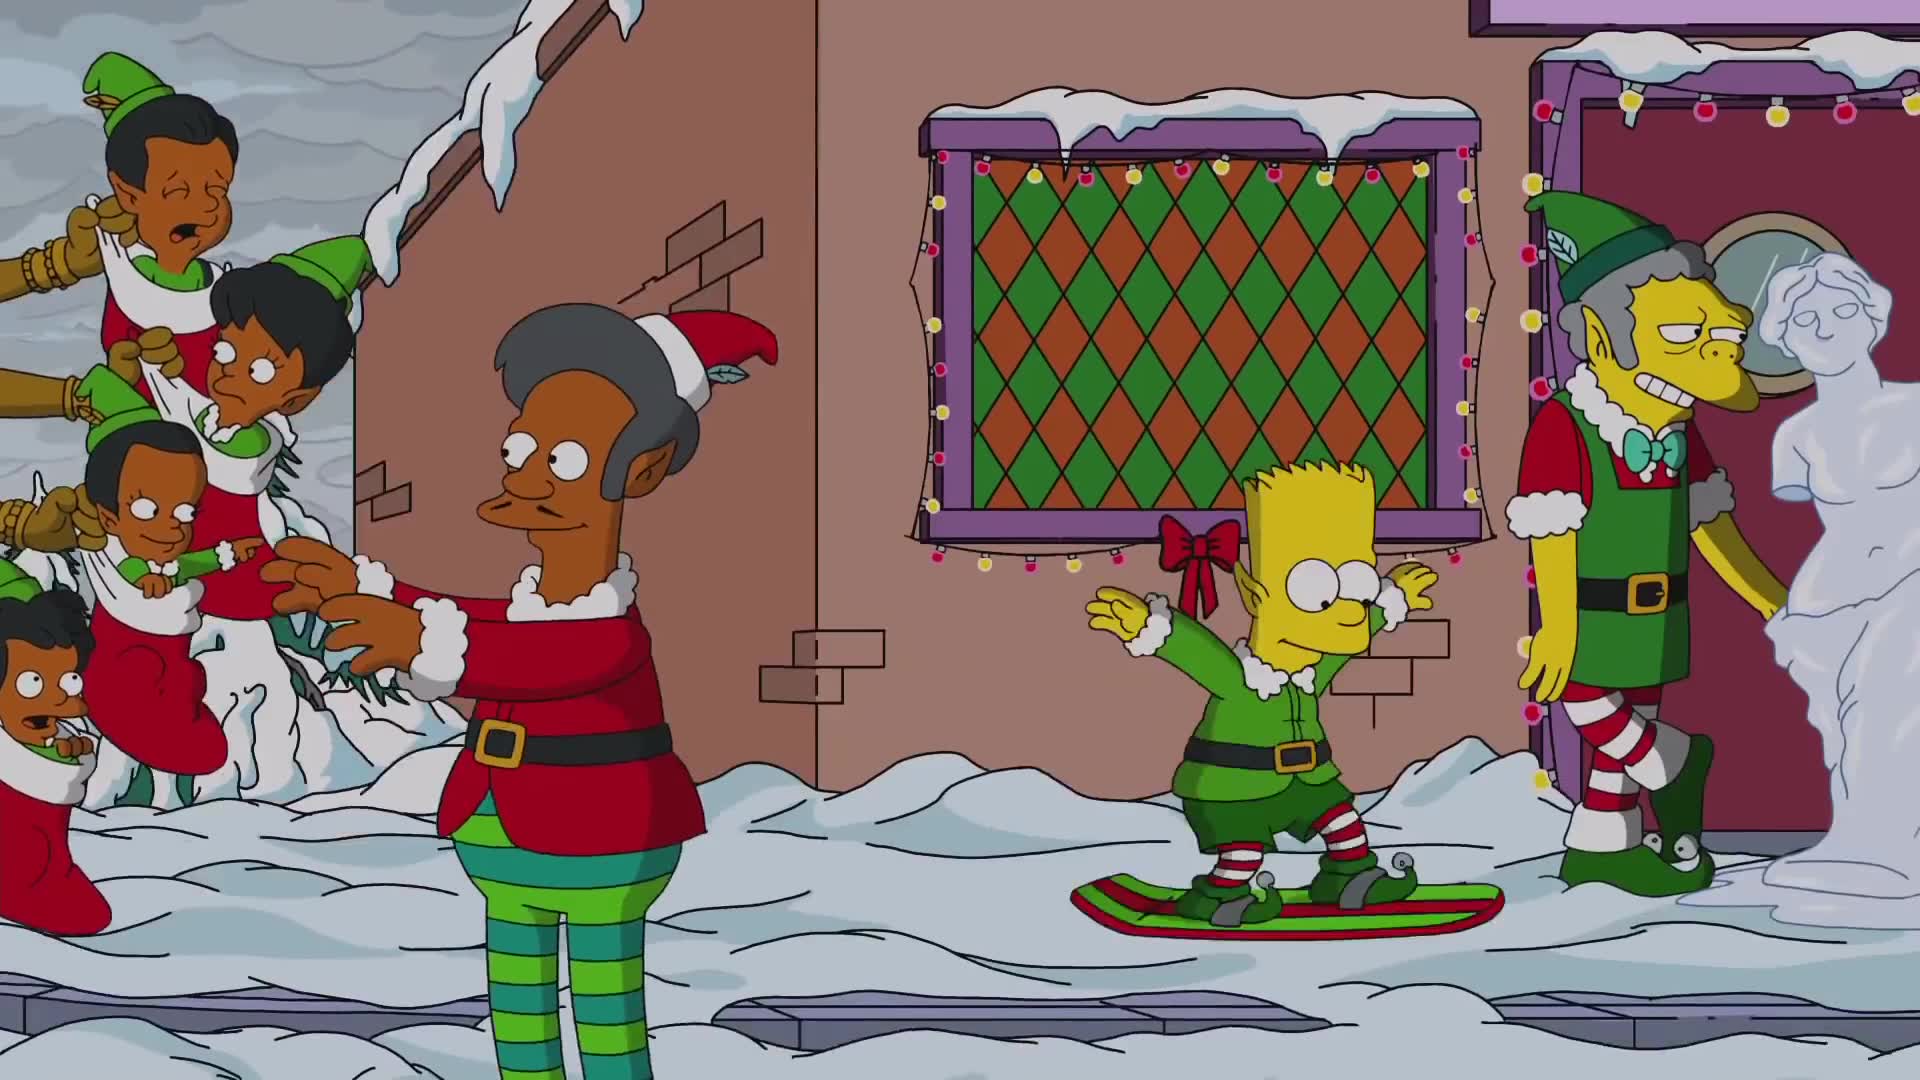 The Simpsons I Won't Be Home for Christmas (TV Episode 2014)